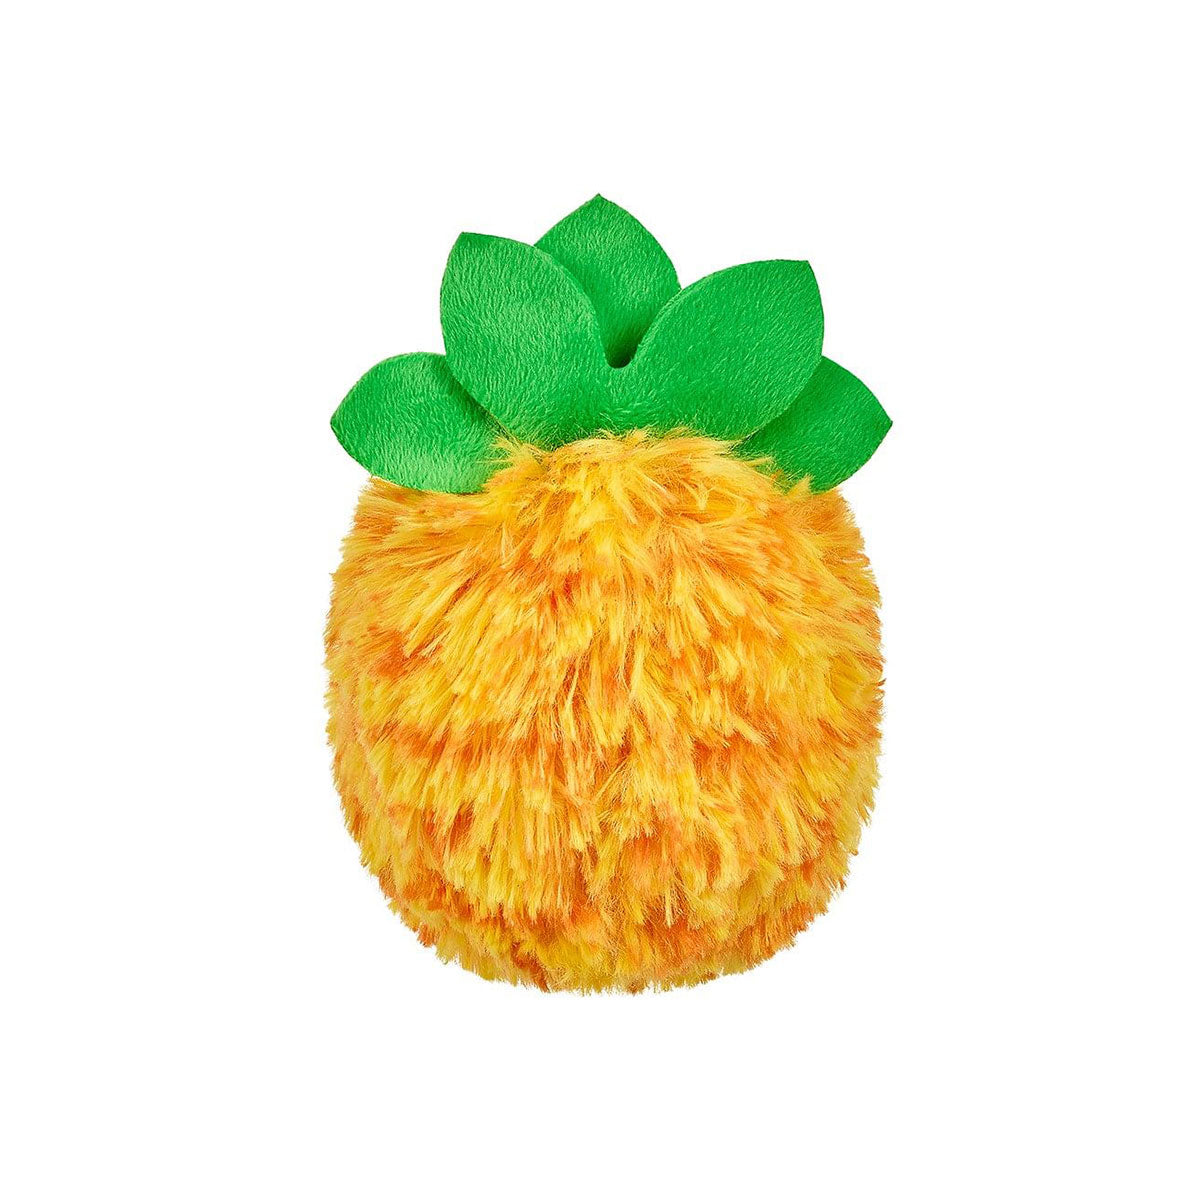 Pikmi Pops Flips Fruit Fiesta (Colors Vary - One Supplied)